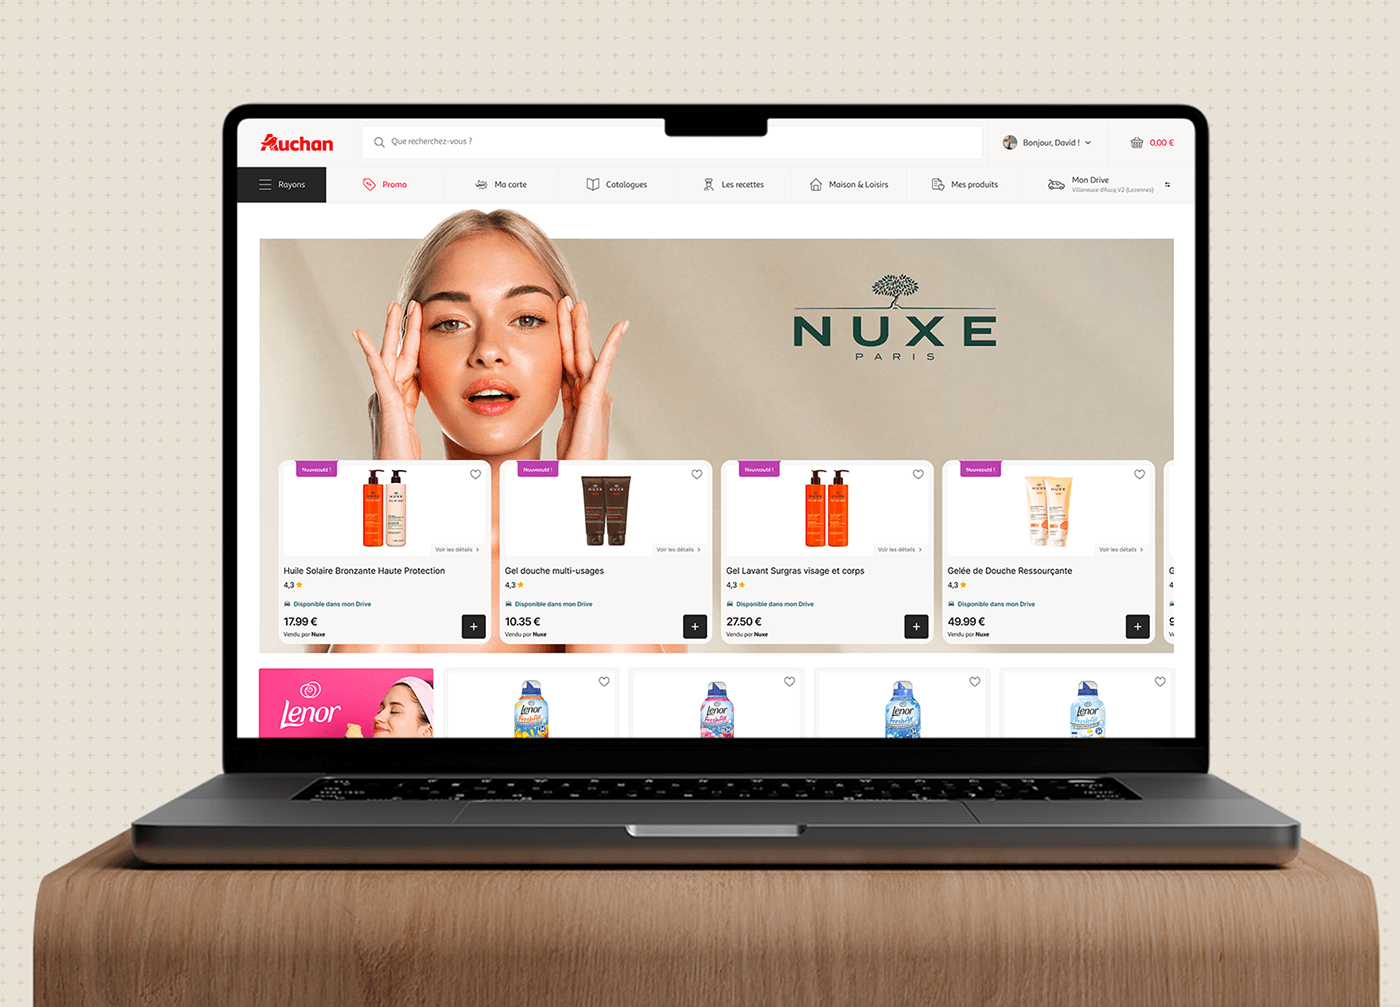 UI/UX ui design user interface Website Figma user experience shop Grocery Ecommerce Auchan